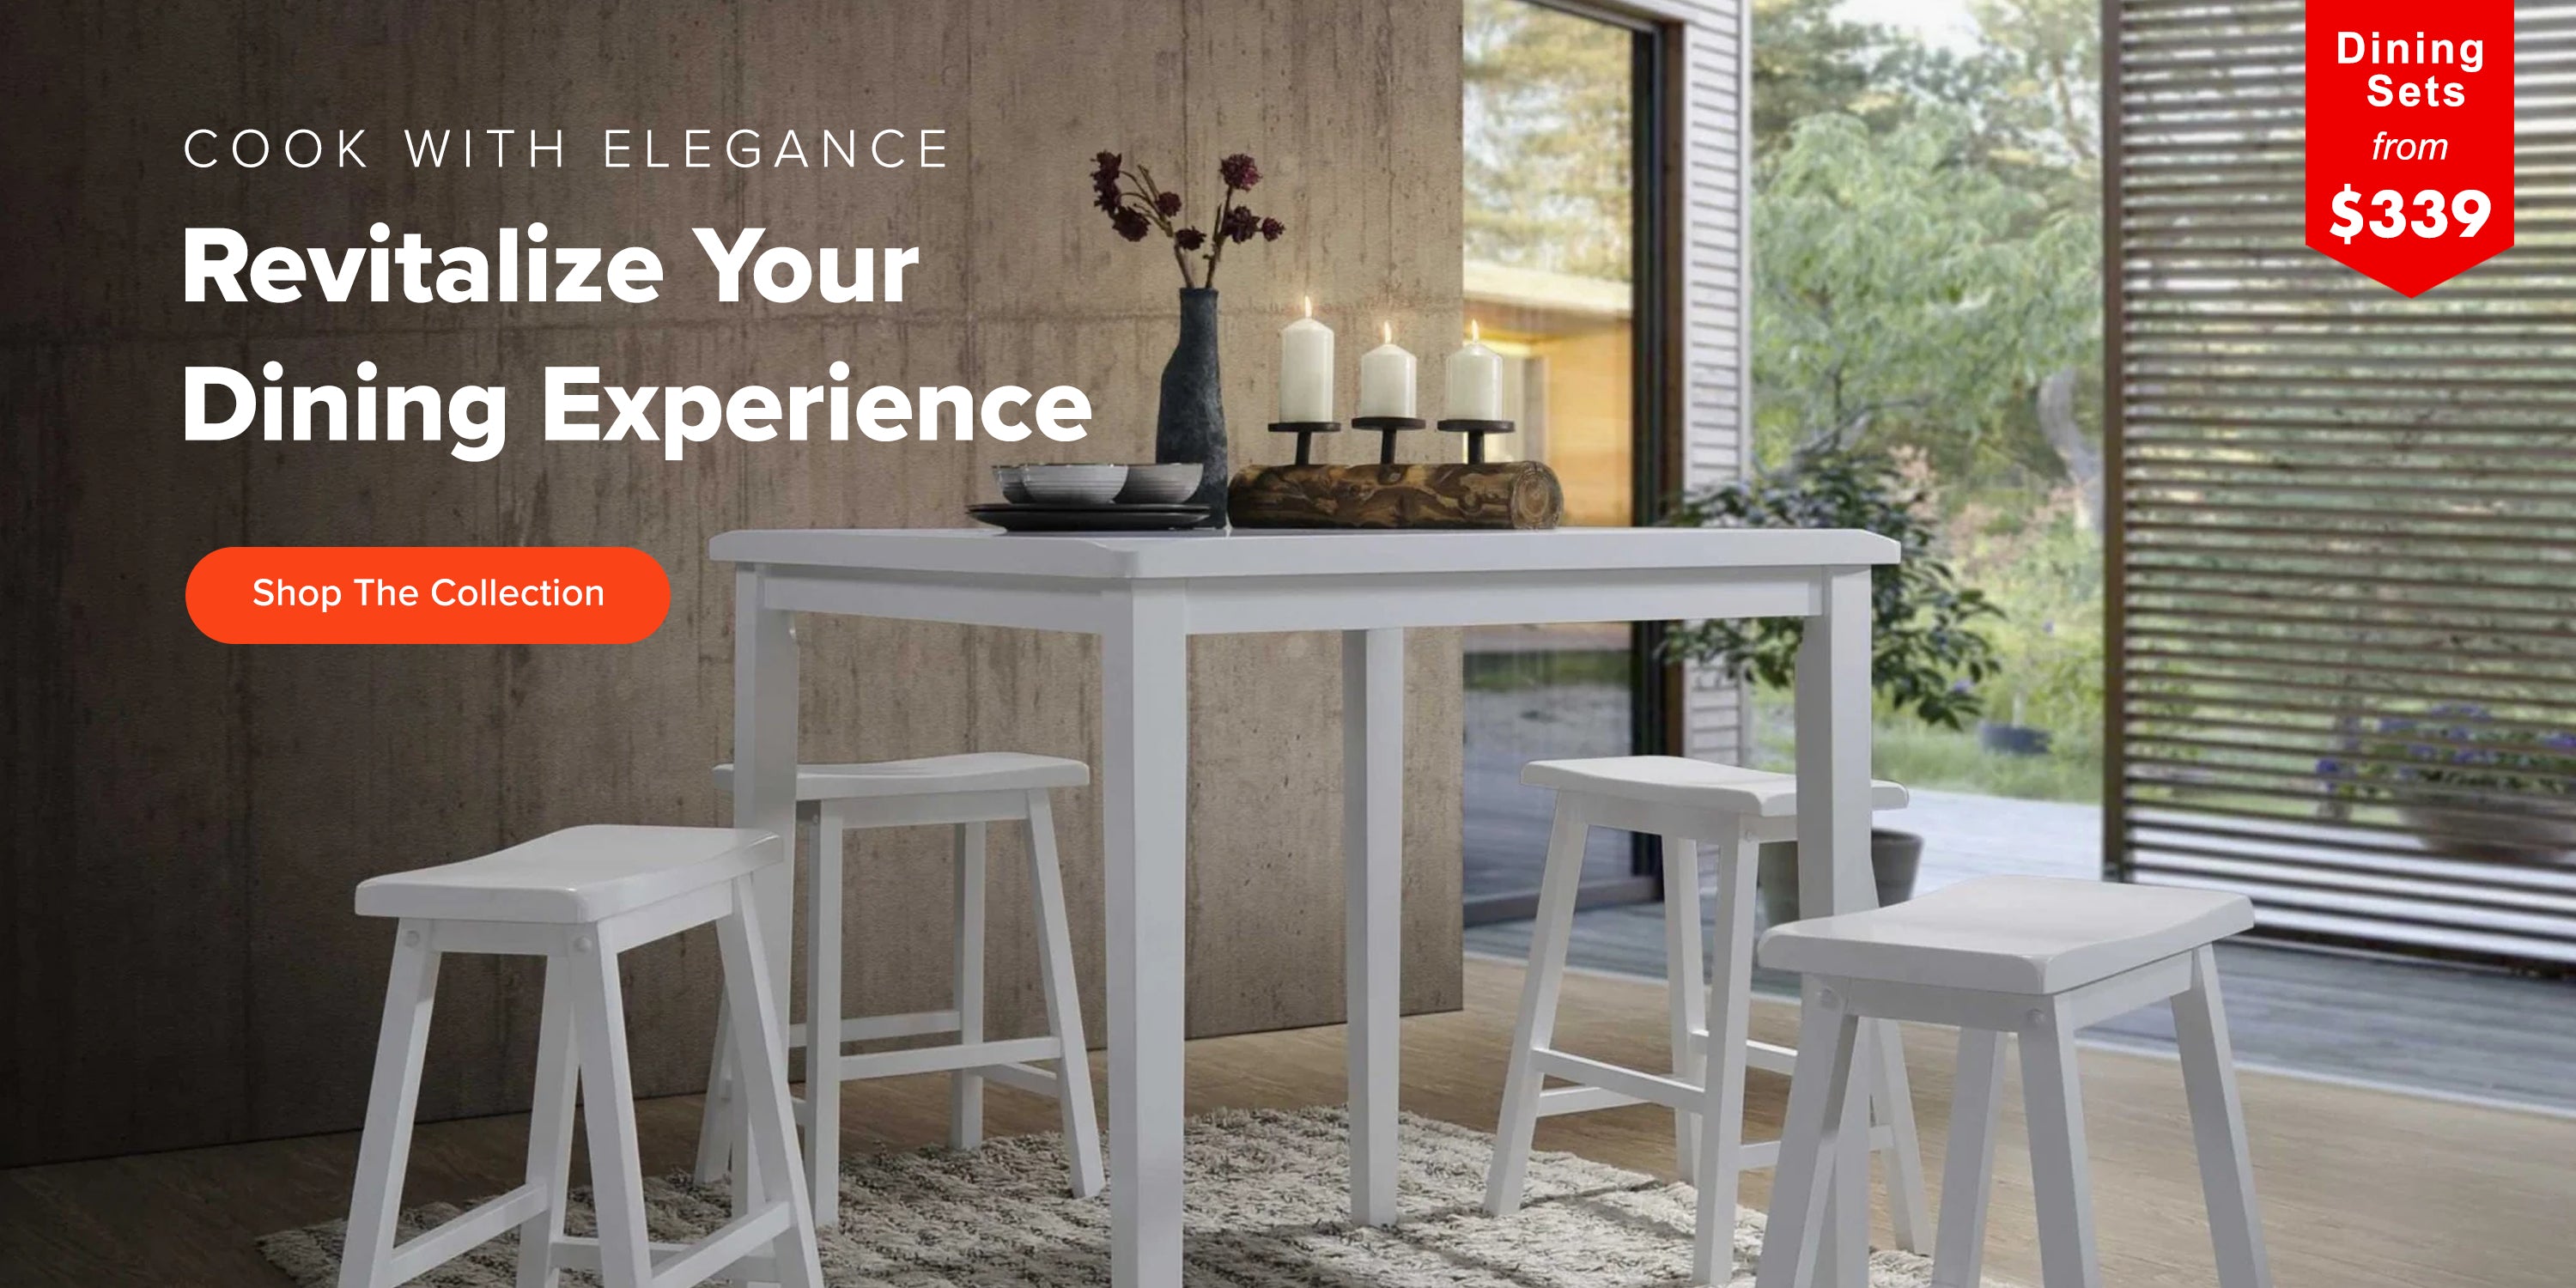 Cook with Elegance - Revitalize Your Dining Experience